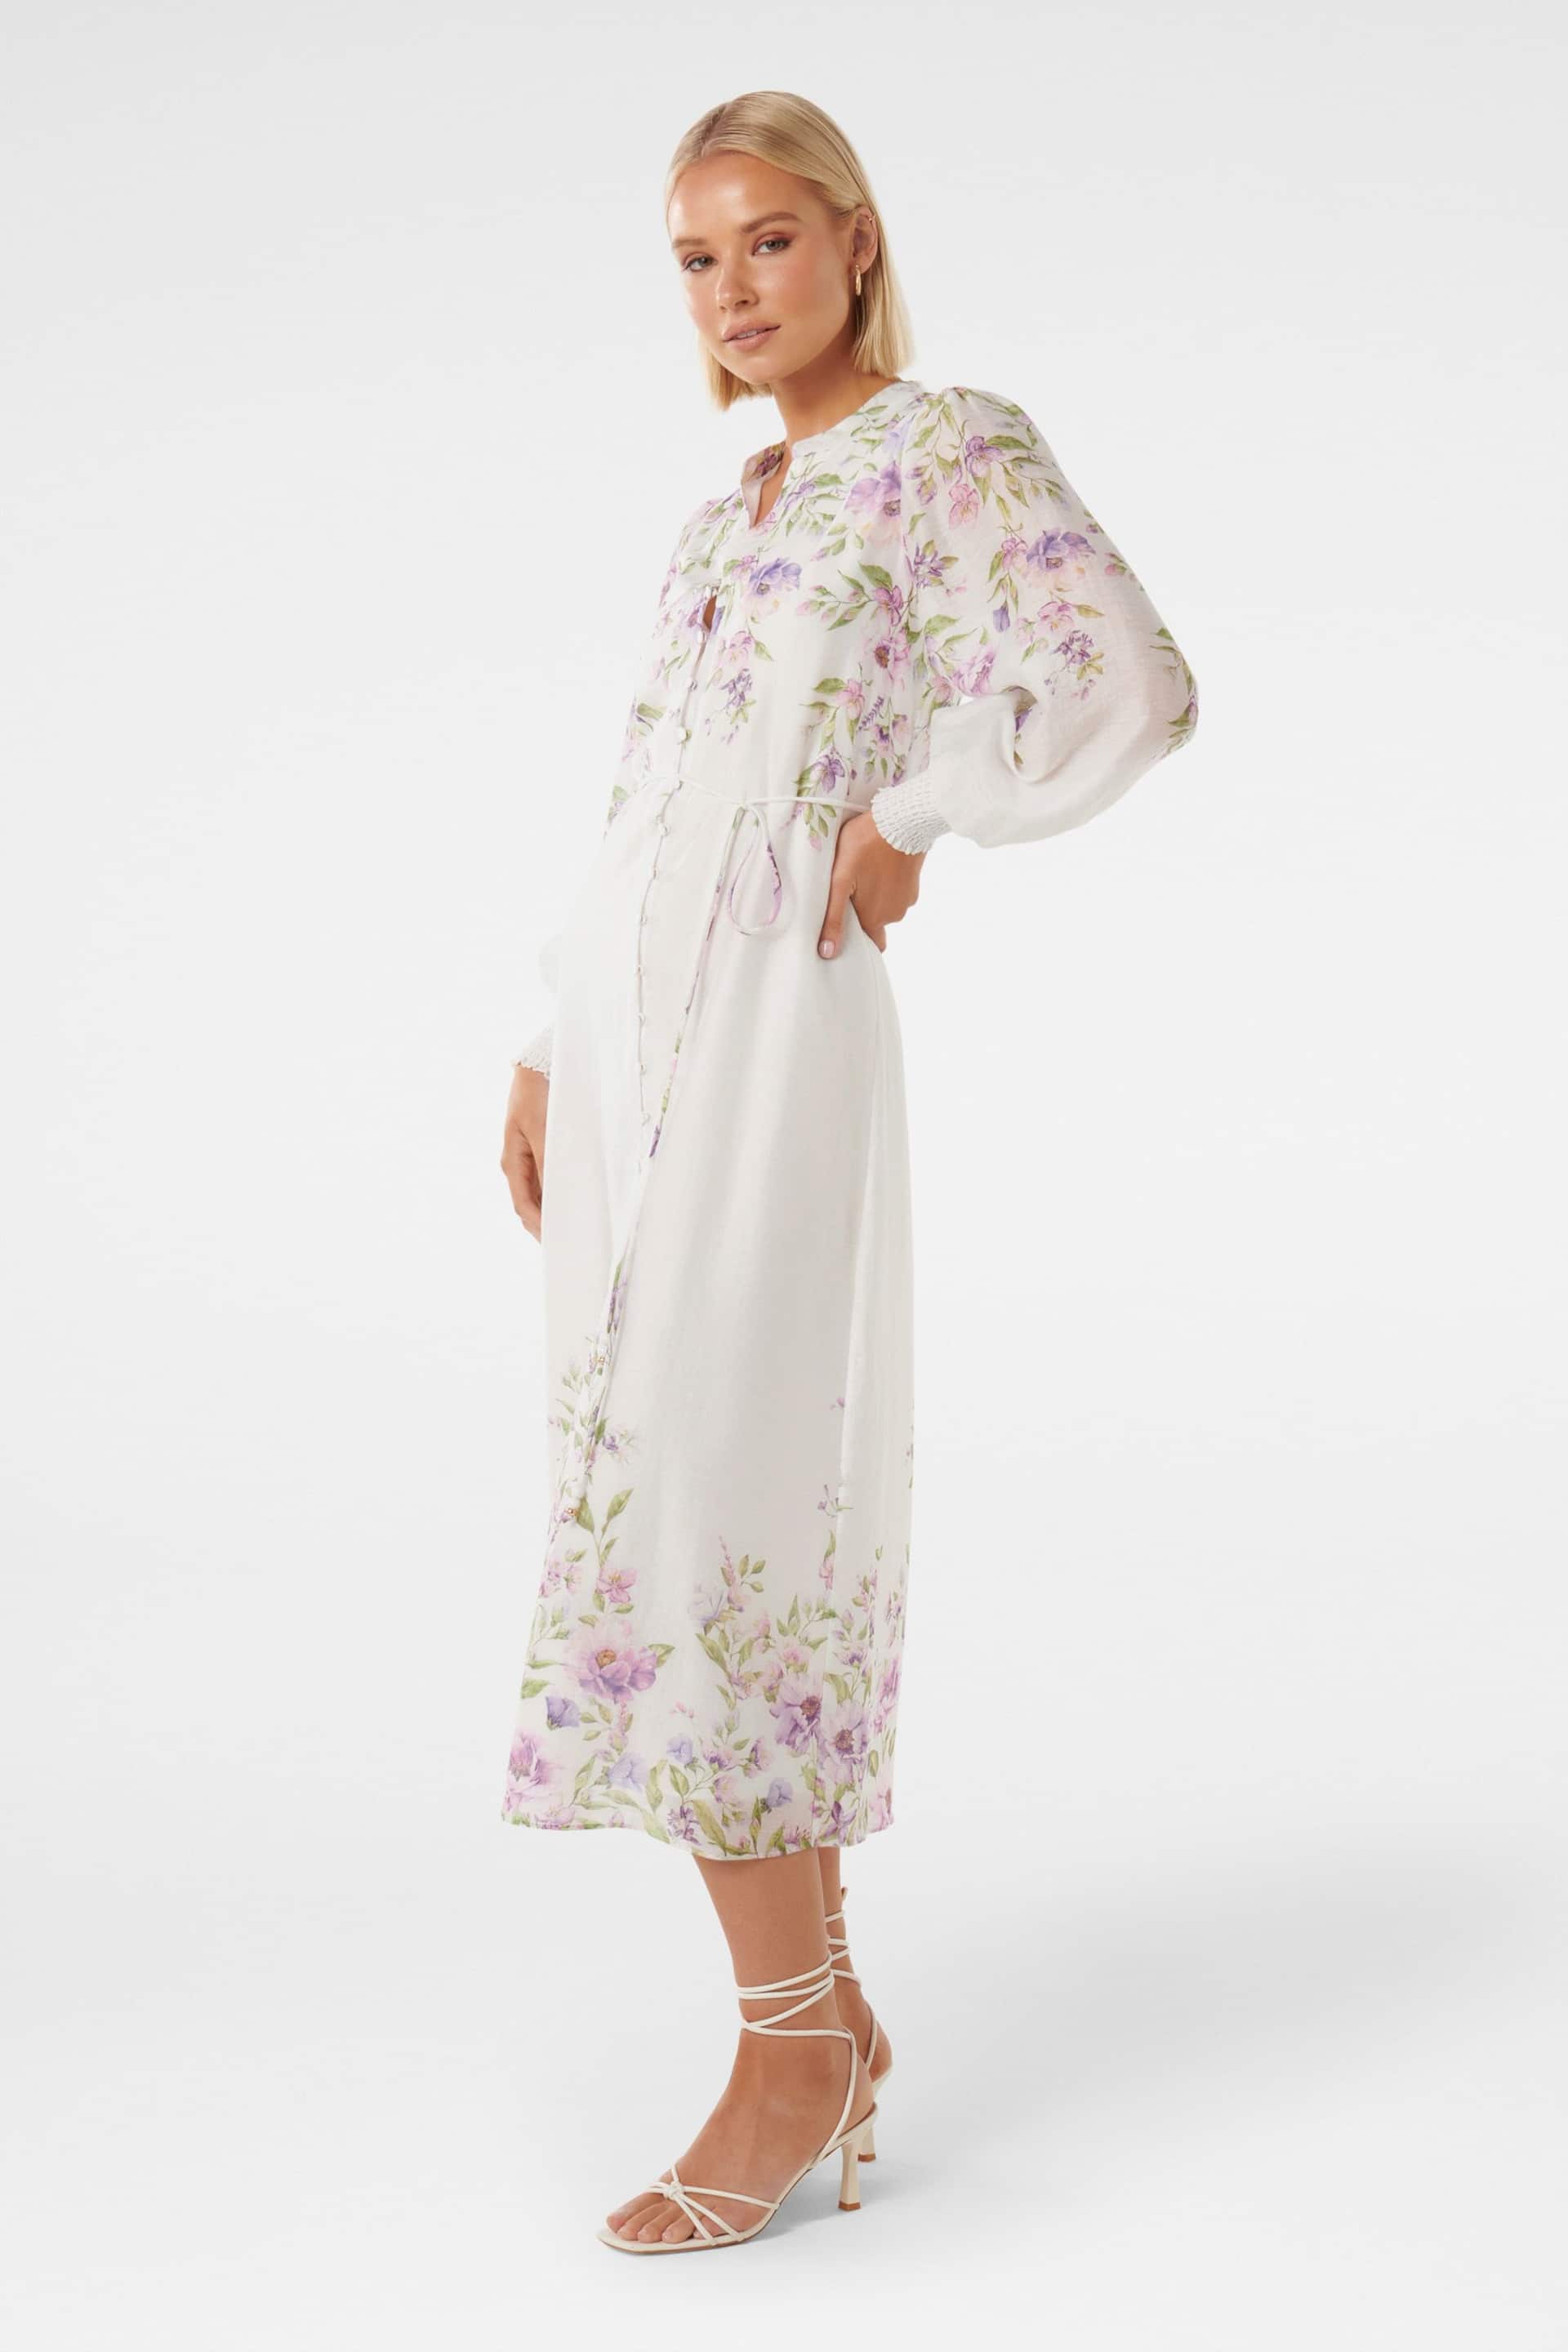 Forever New White Olympia Printed Shirt Dress contains Linen - Image 3 of 4